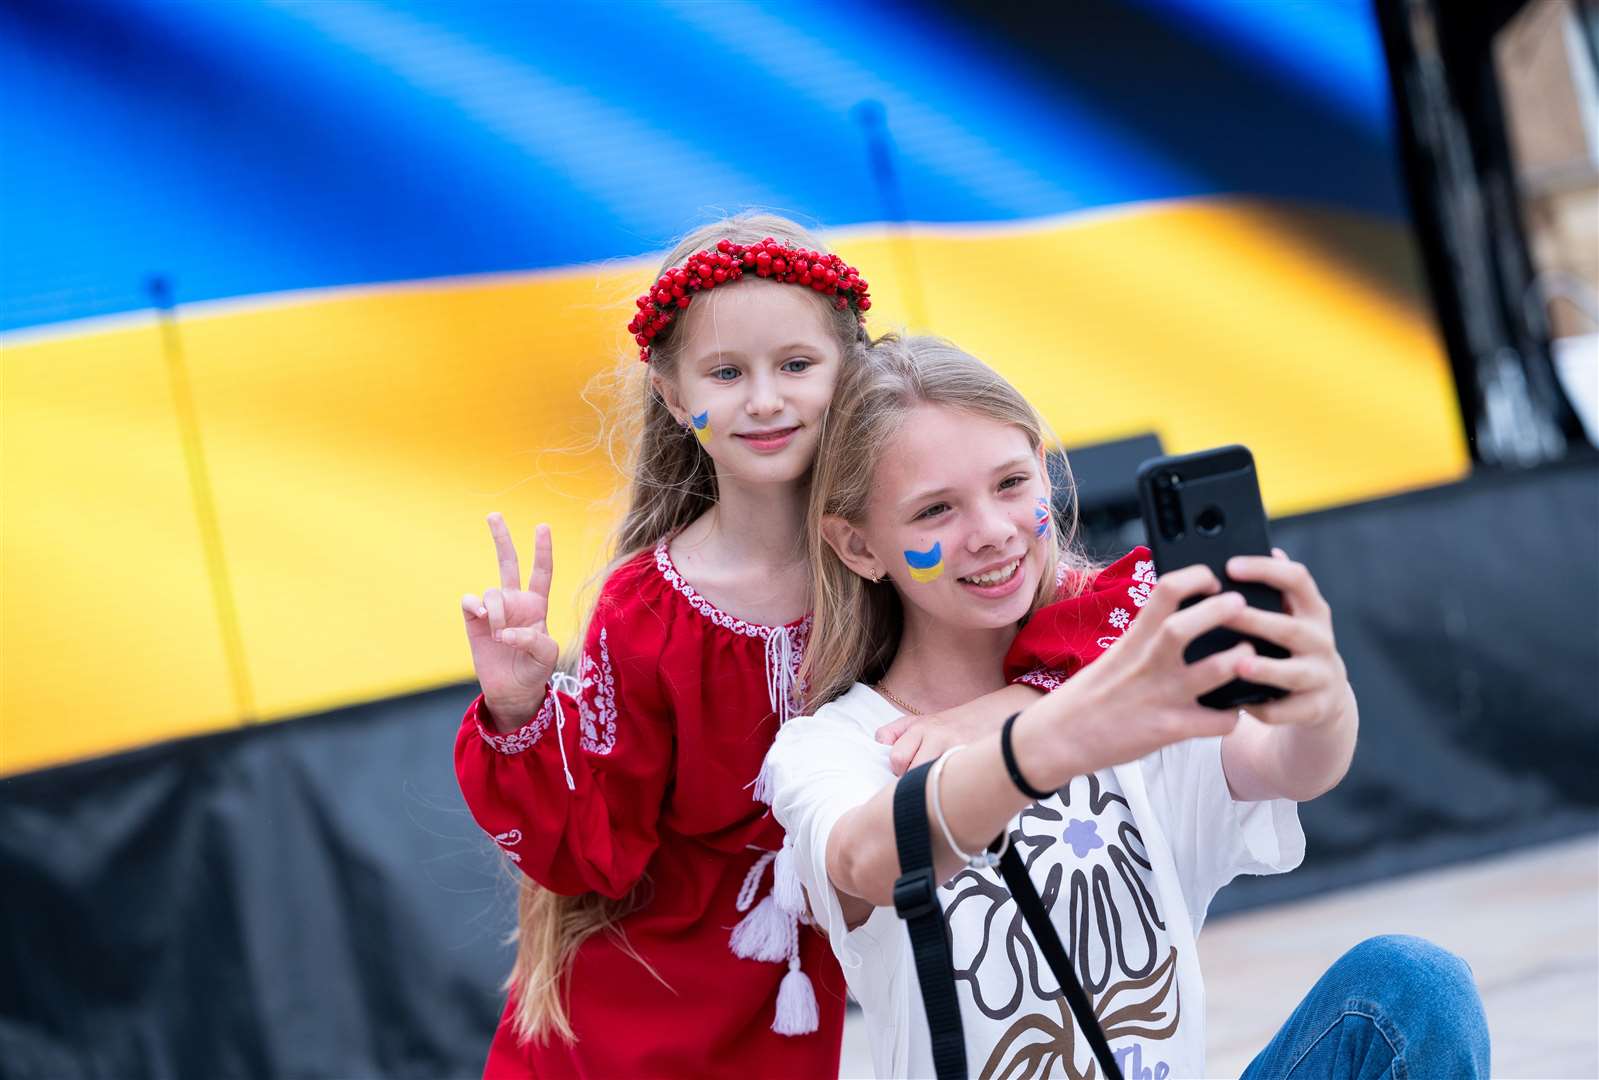 Time for a selfie on Ukraine Independence Day.